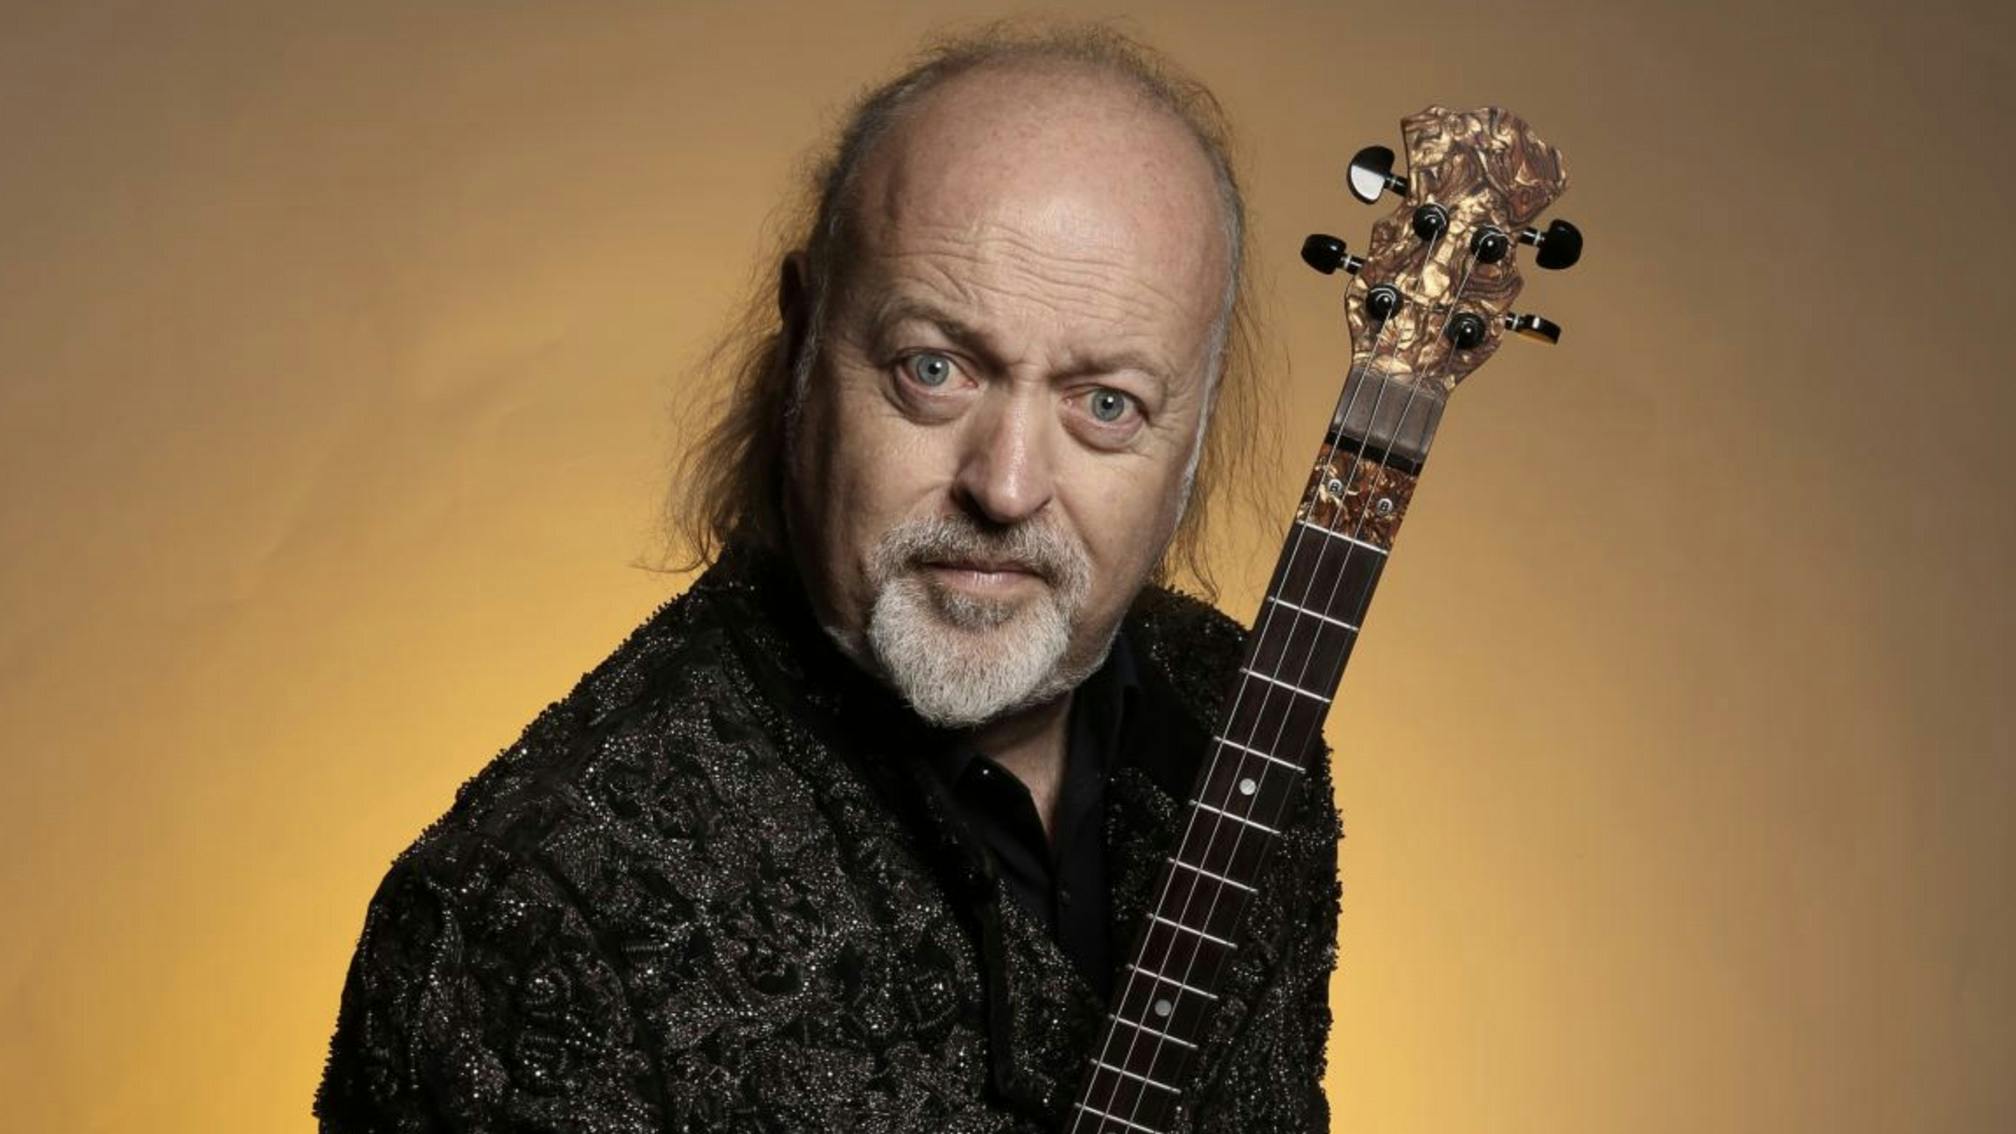 Bill Bailey is working on a Eurovision 2022 song